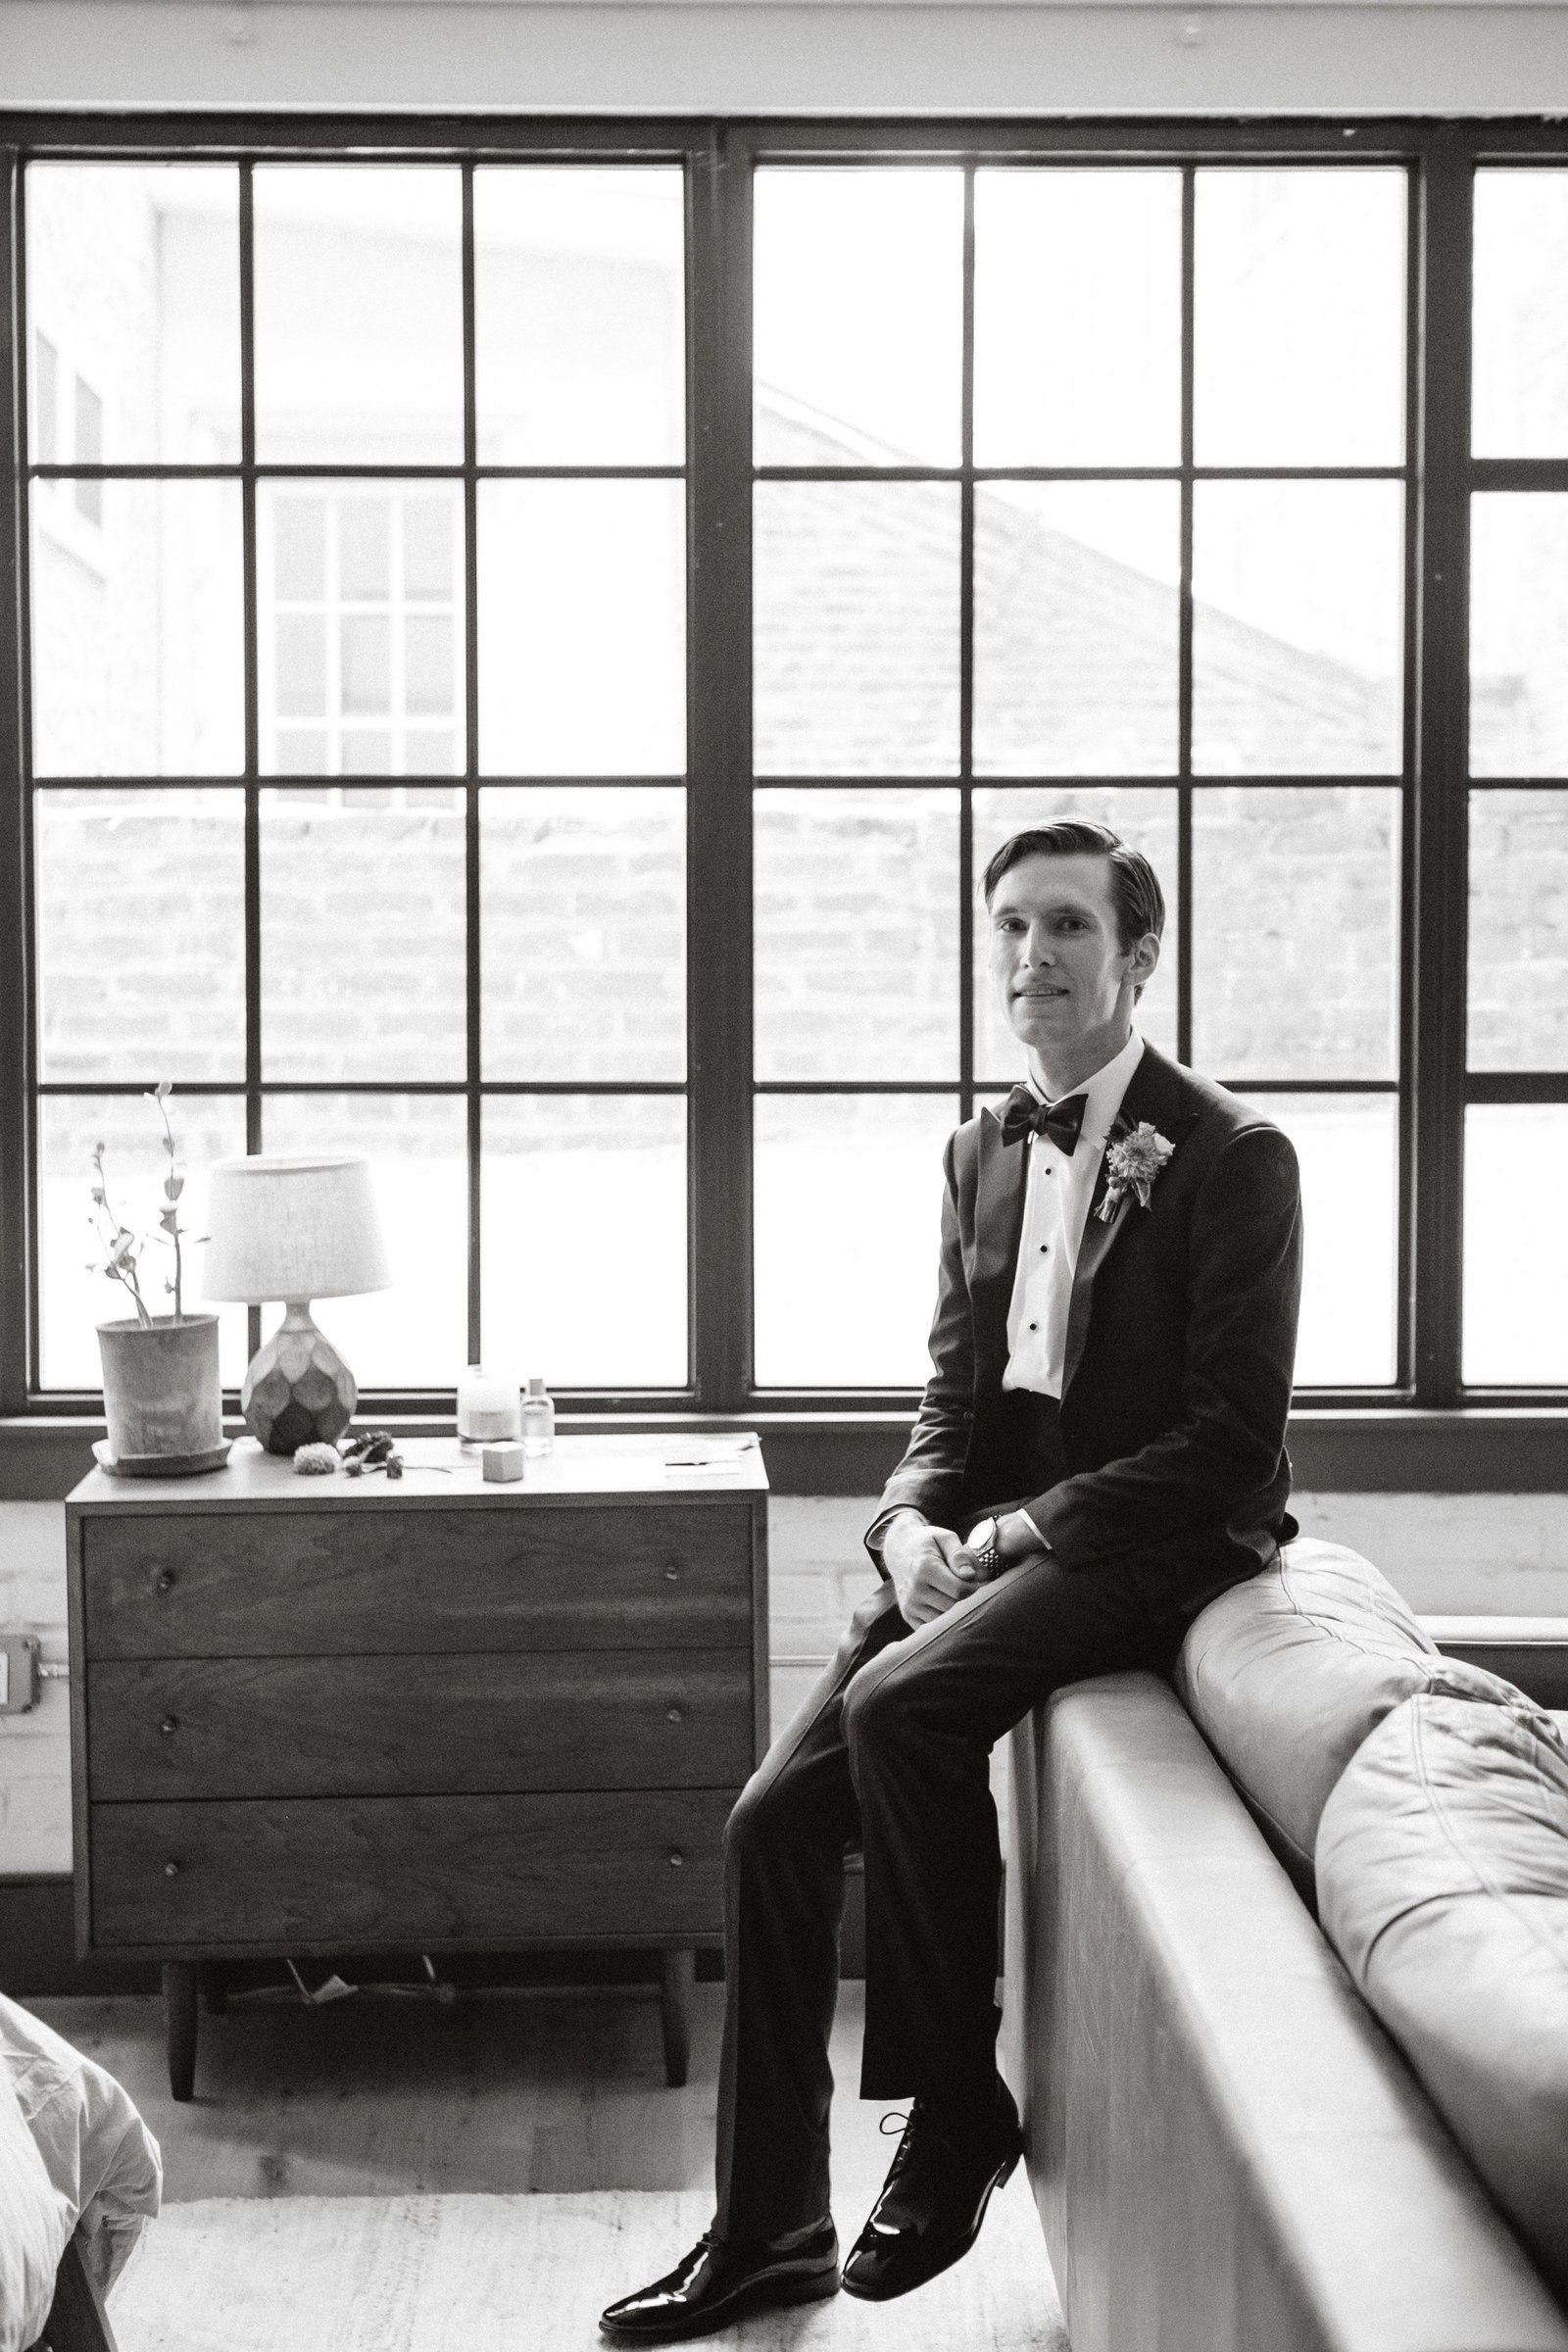 Stylish and handsome, this groom is ready for the wedding festivities.